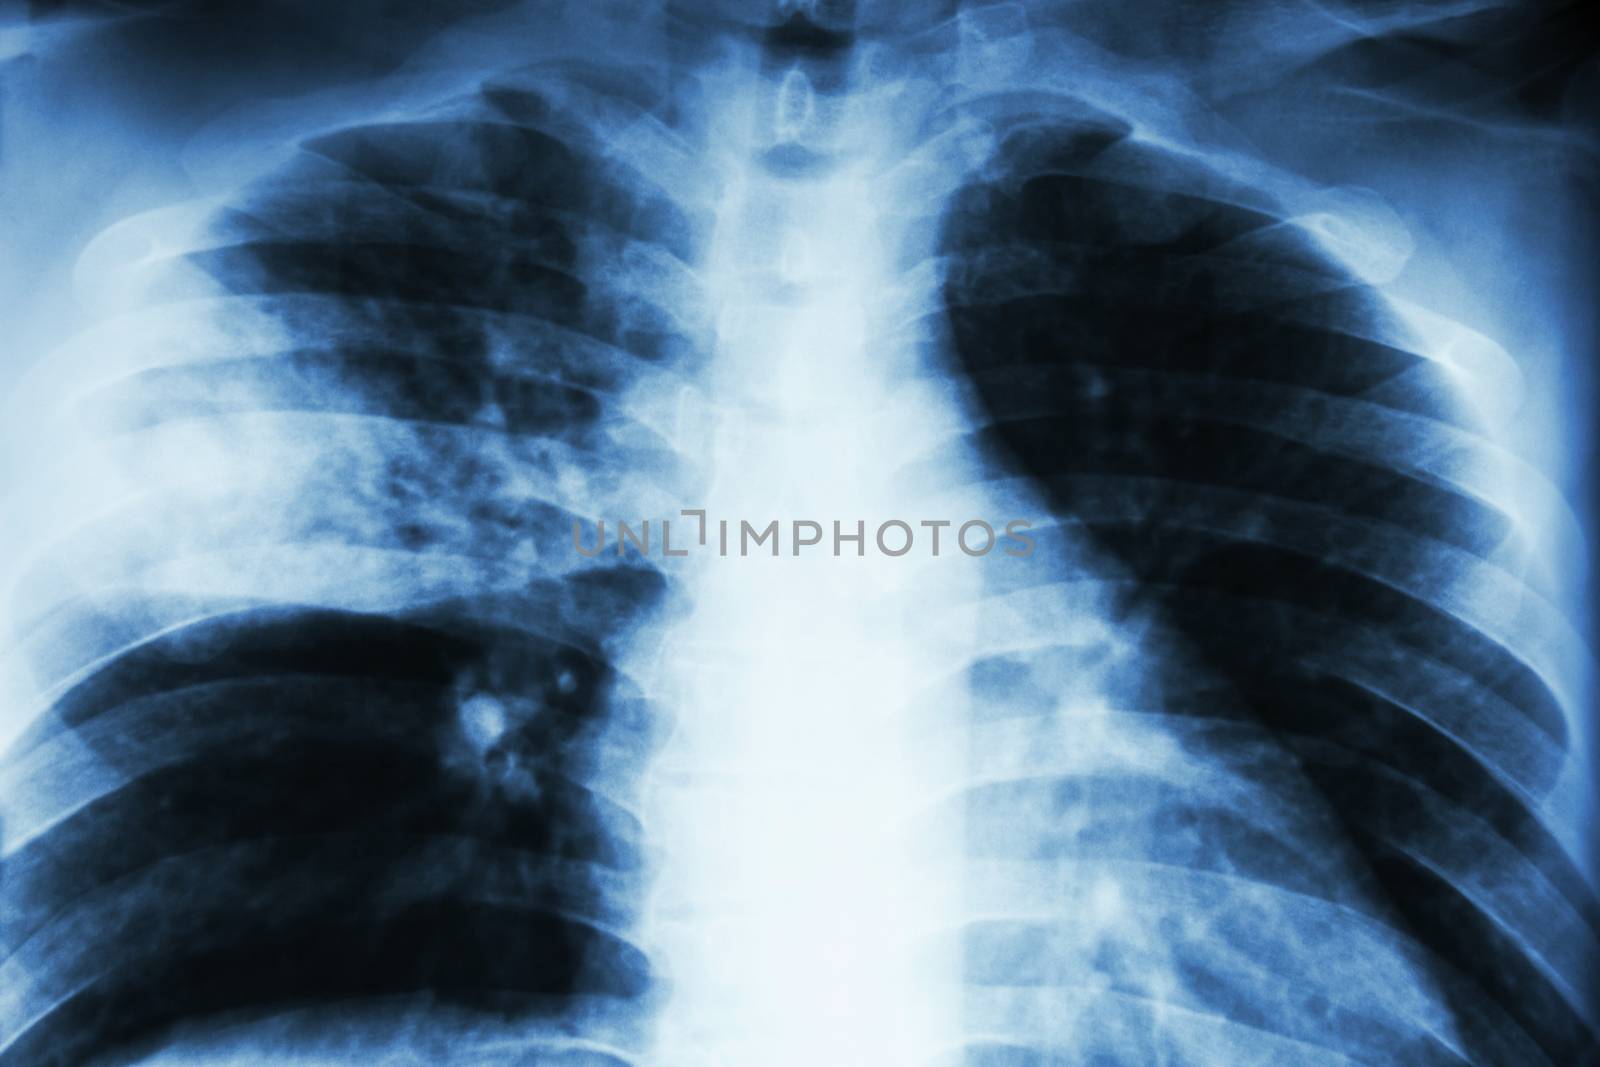 Lobar pneumonia . film chest x-ray show alveolar infiltration at right middle lobe due to tuberculosis infection .